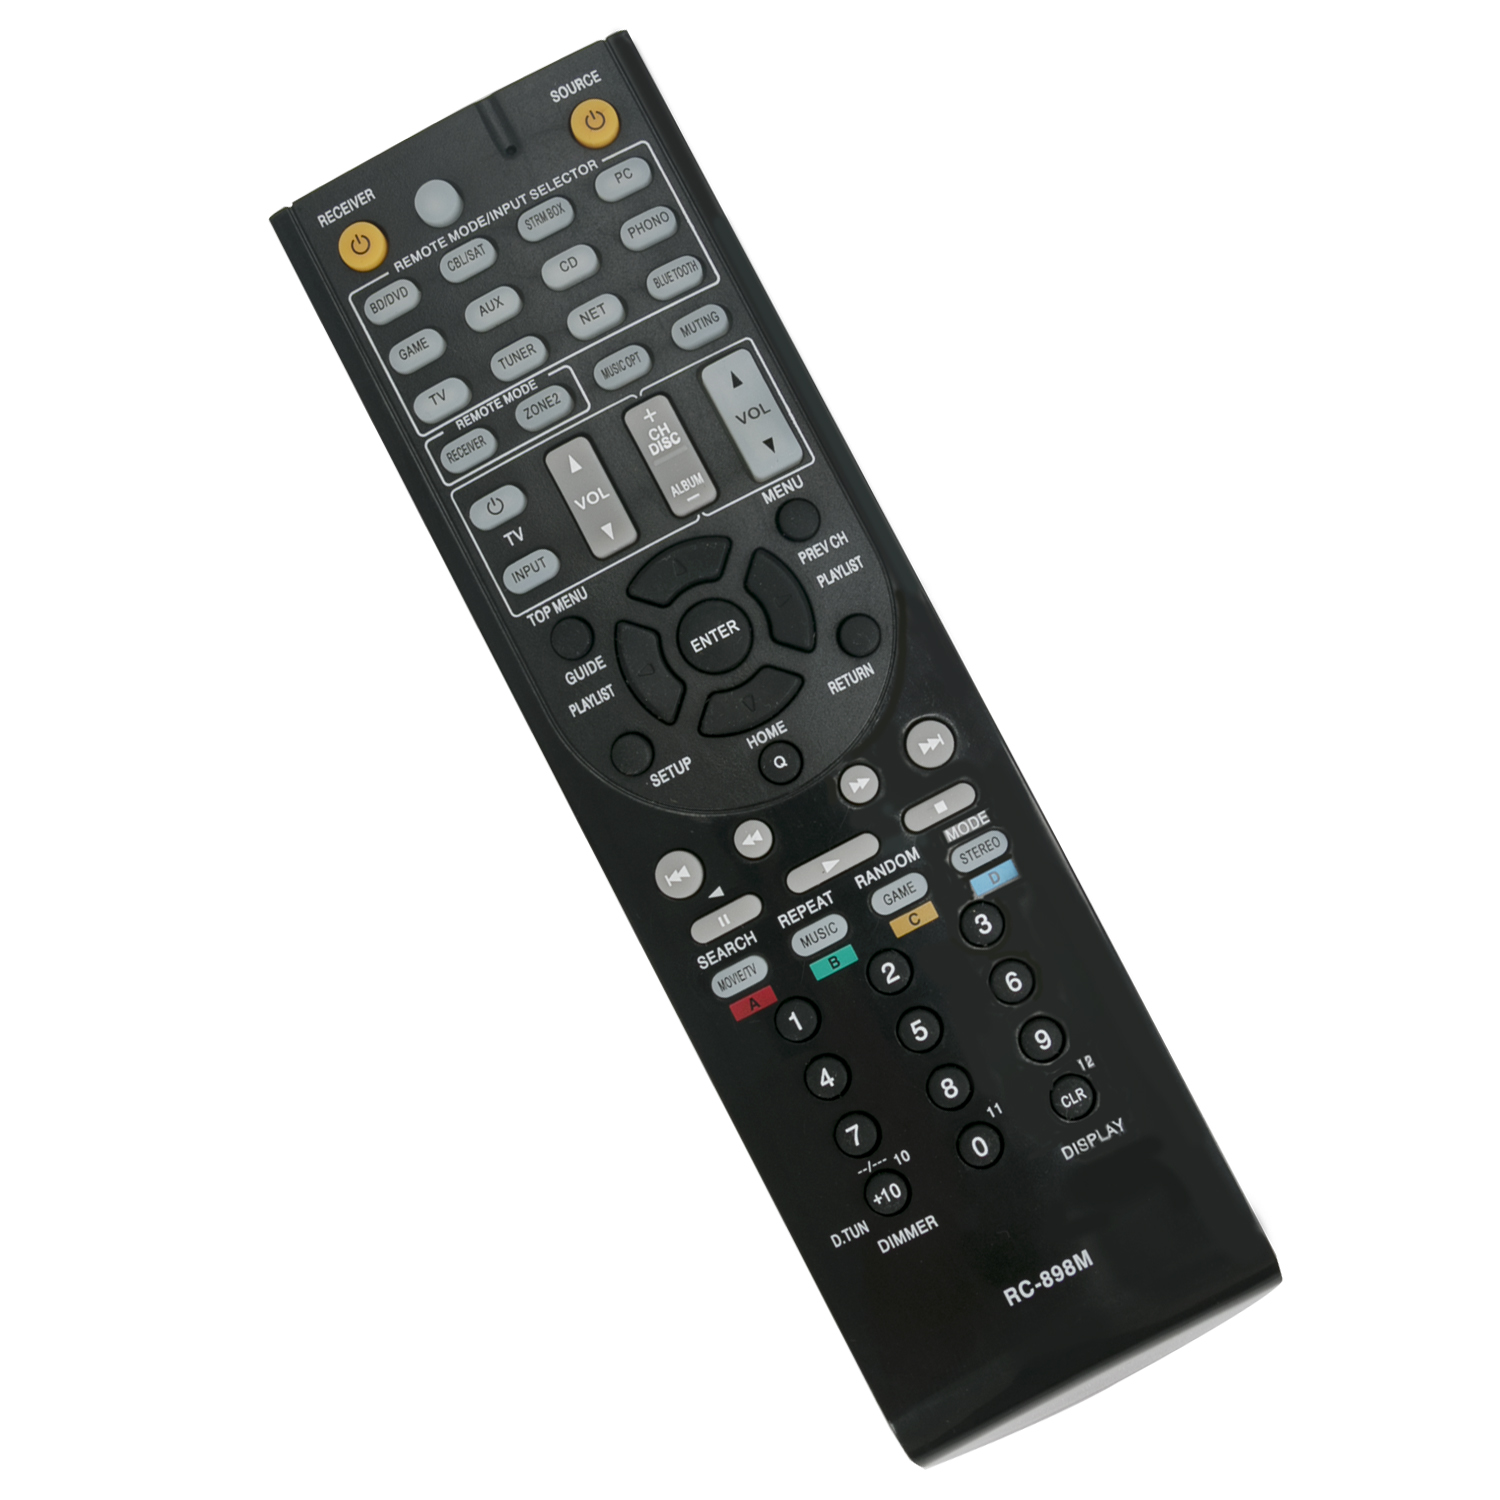 New RC-898M RC898M Replaced Remote Control fit for Onkyo AV Receiver TX-NR646  TX-NR747 TX-NR545 TXNR646 TXNR747 TXNR545